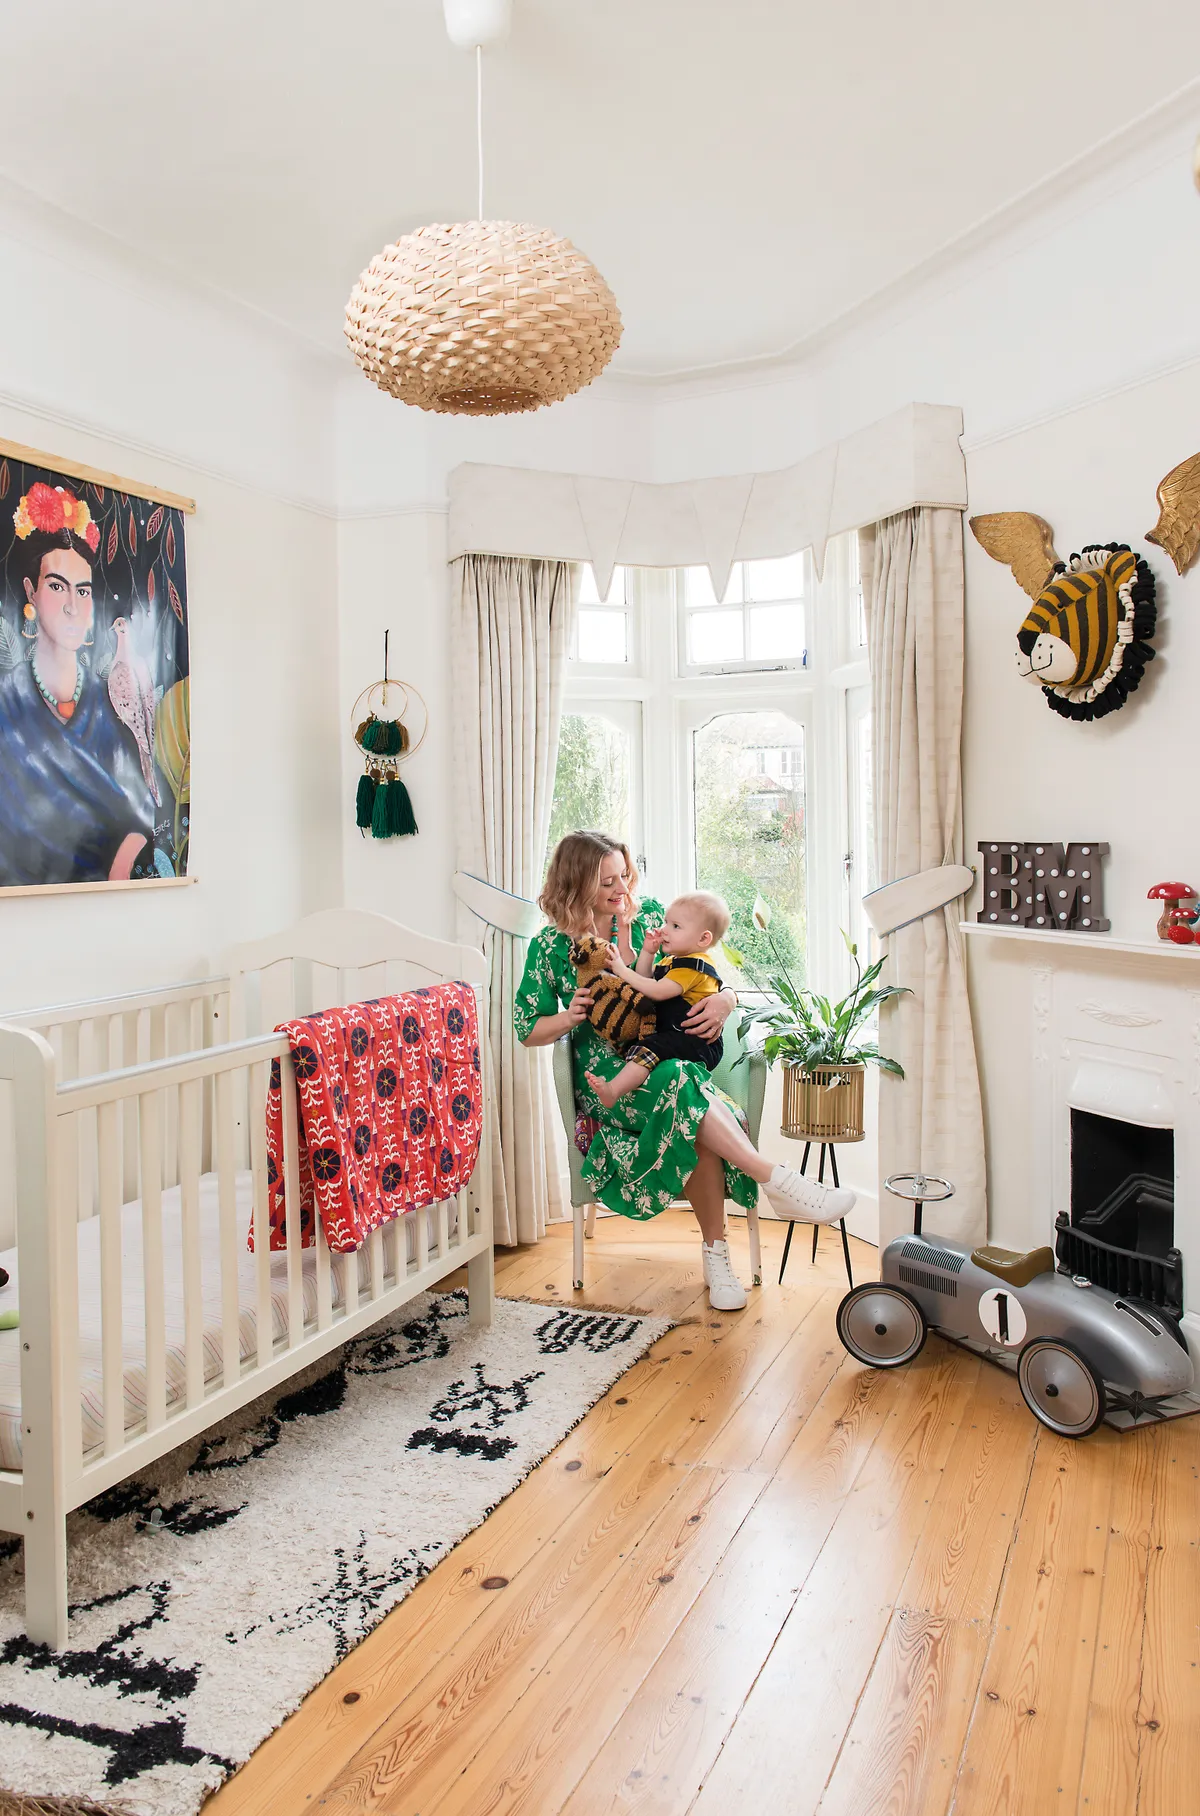 ‘I kept the curtains that were here in Bowe’s room already, as they’re neutral and do a great job blocking the light,’ says Sophie. ‘His cot is a family hand-me-down and the Lloyd Loom chair was a charity shop buy that I’ve painted’